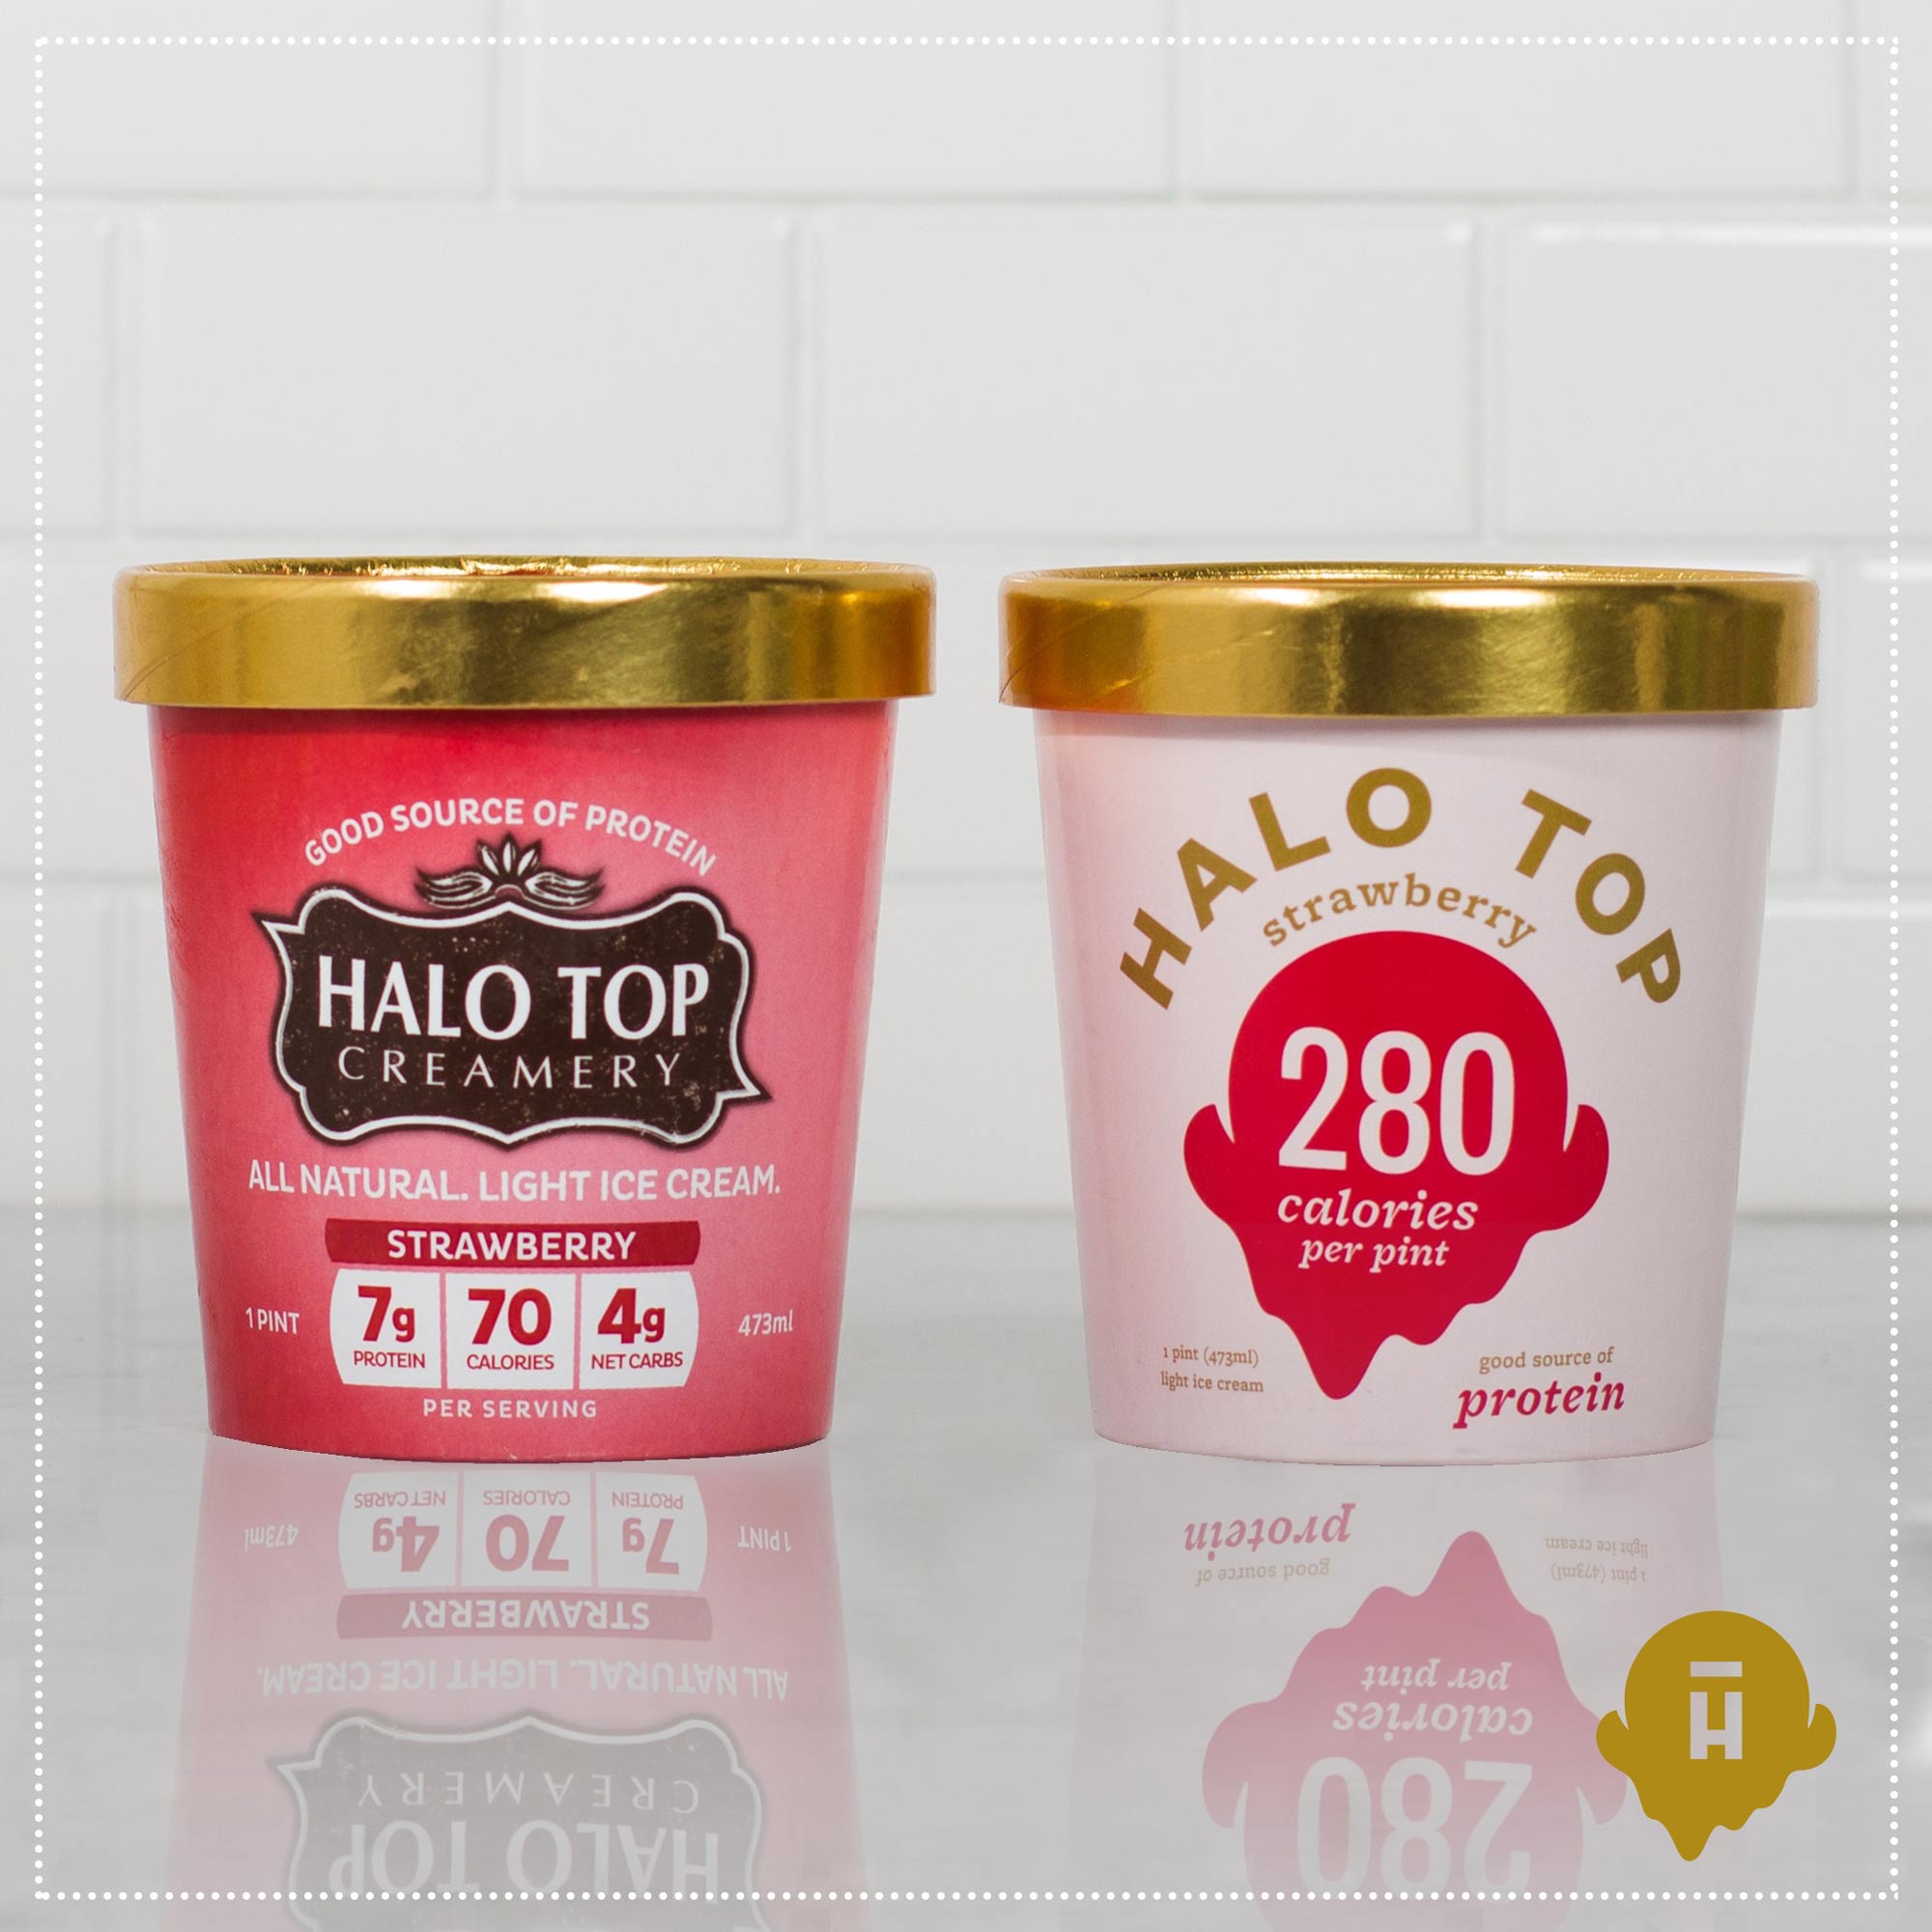 Two pints of Halo Top ice cream